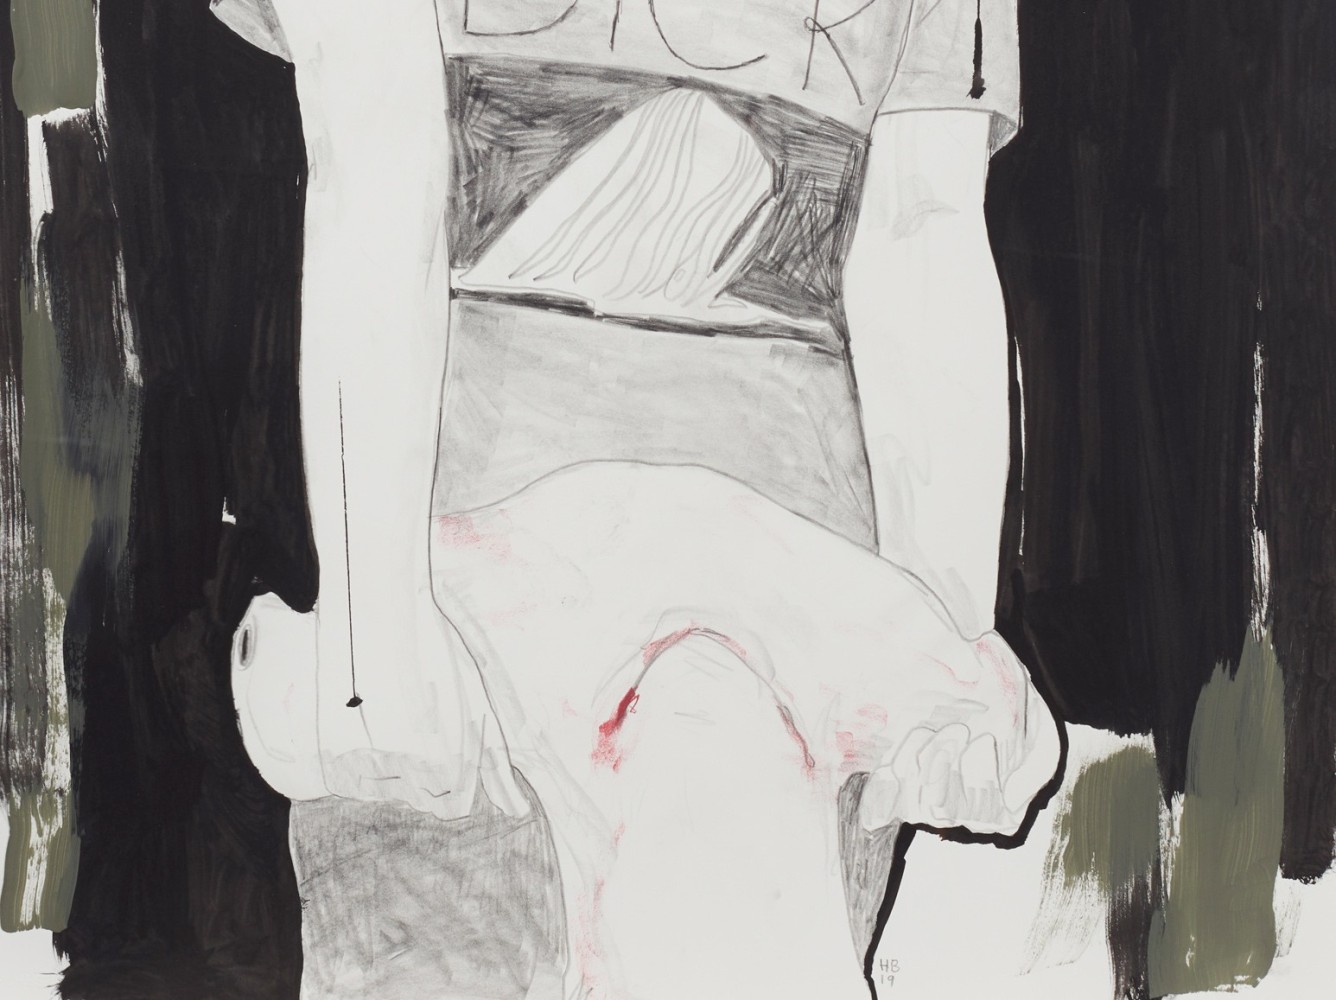 HERNAN BAS

A Moment Eclipsed (study), 2019 (detail)

Pencil and watercolor on paper

29.5 x 22 inches (paper)

74.9 x 55.9 cm

33.75 x 26 x 2 inches (framed)

85.7 x 66 x 5.1 cm